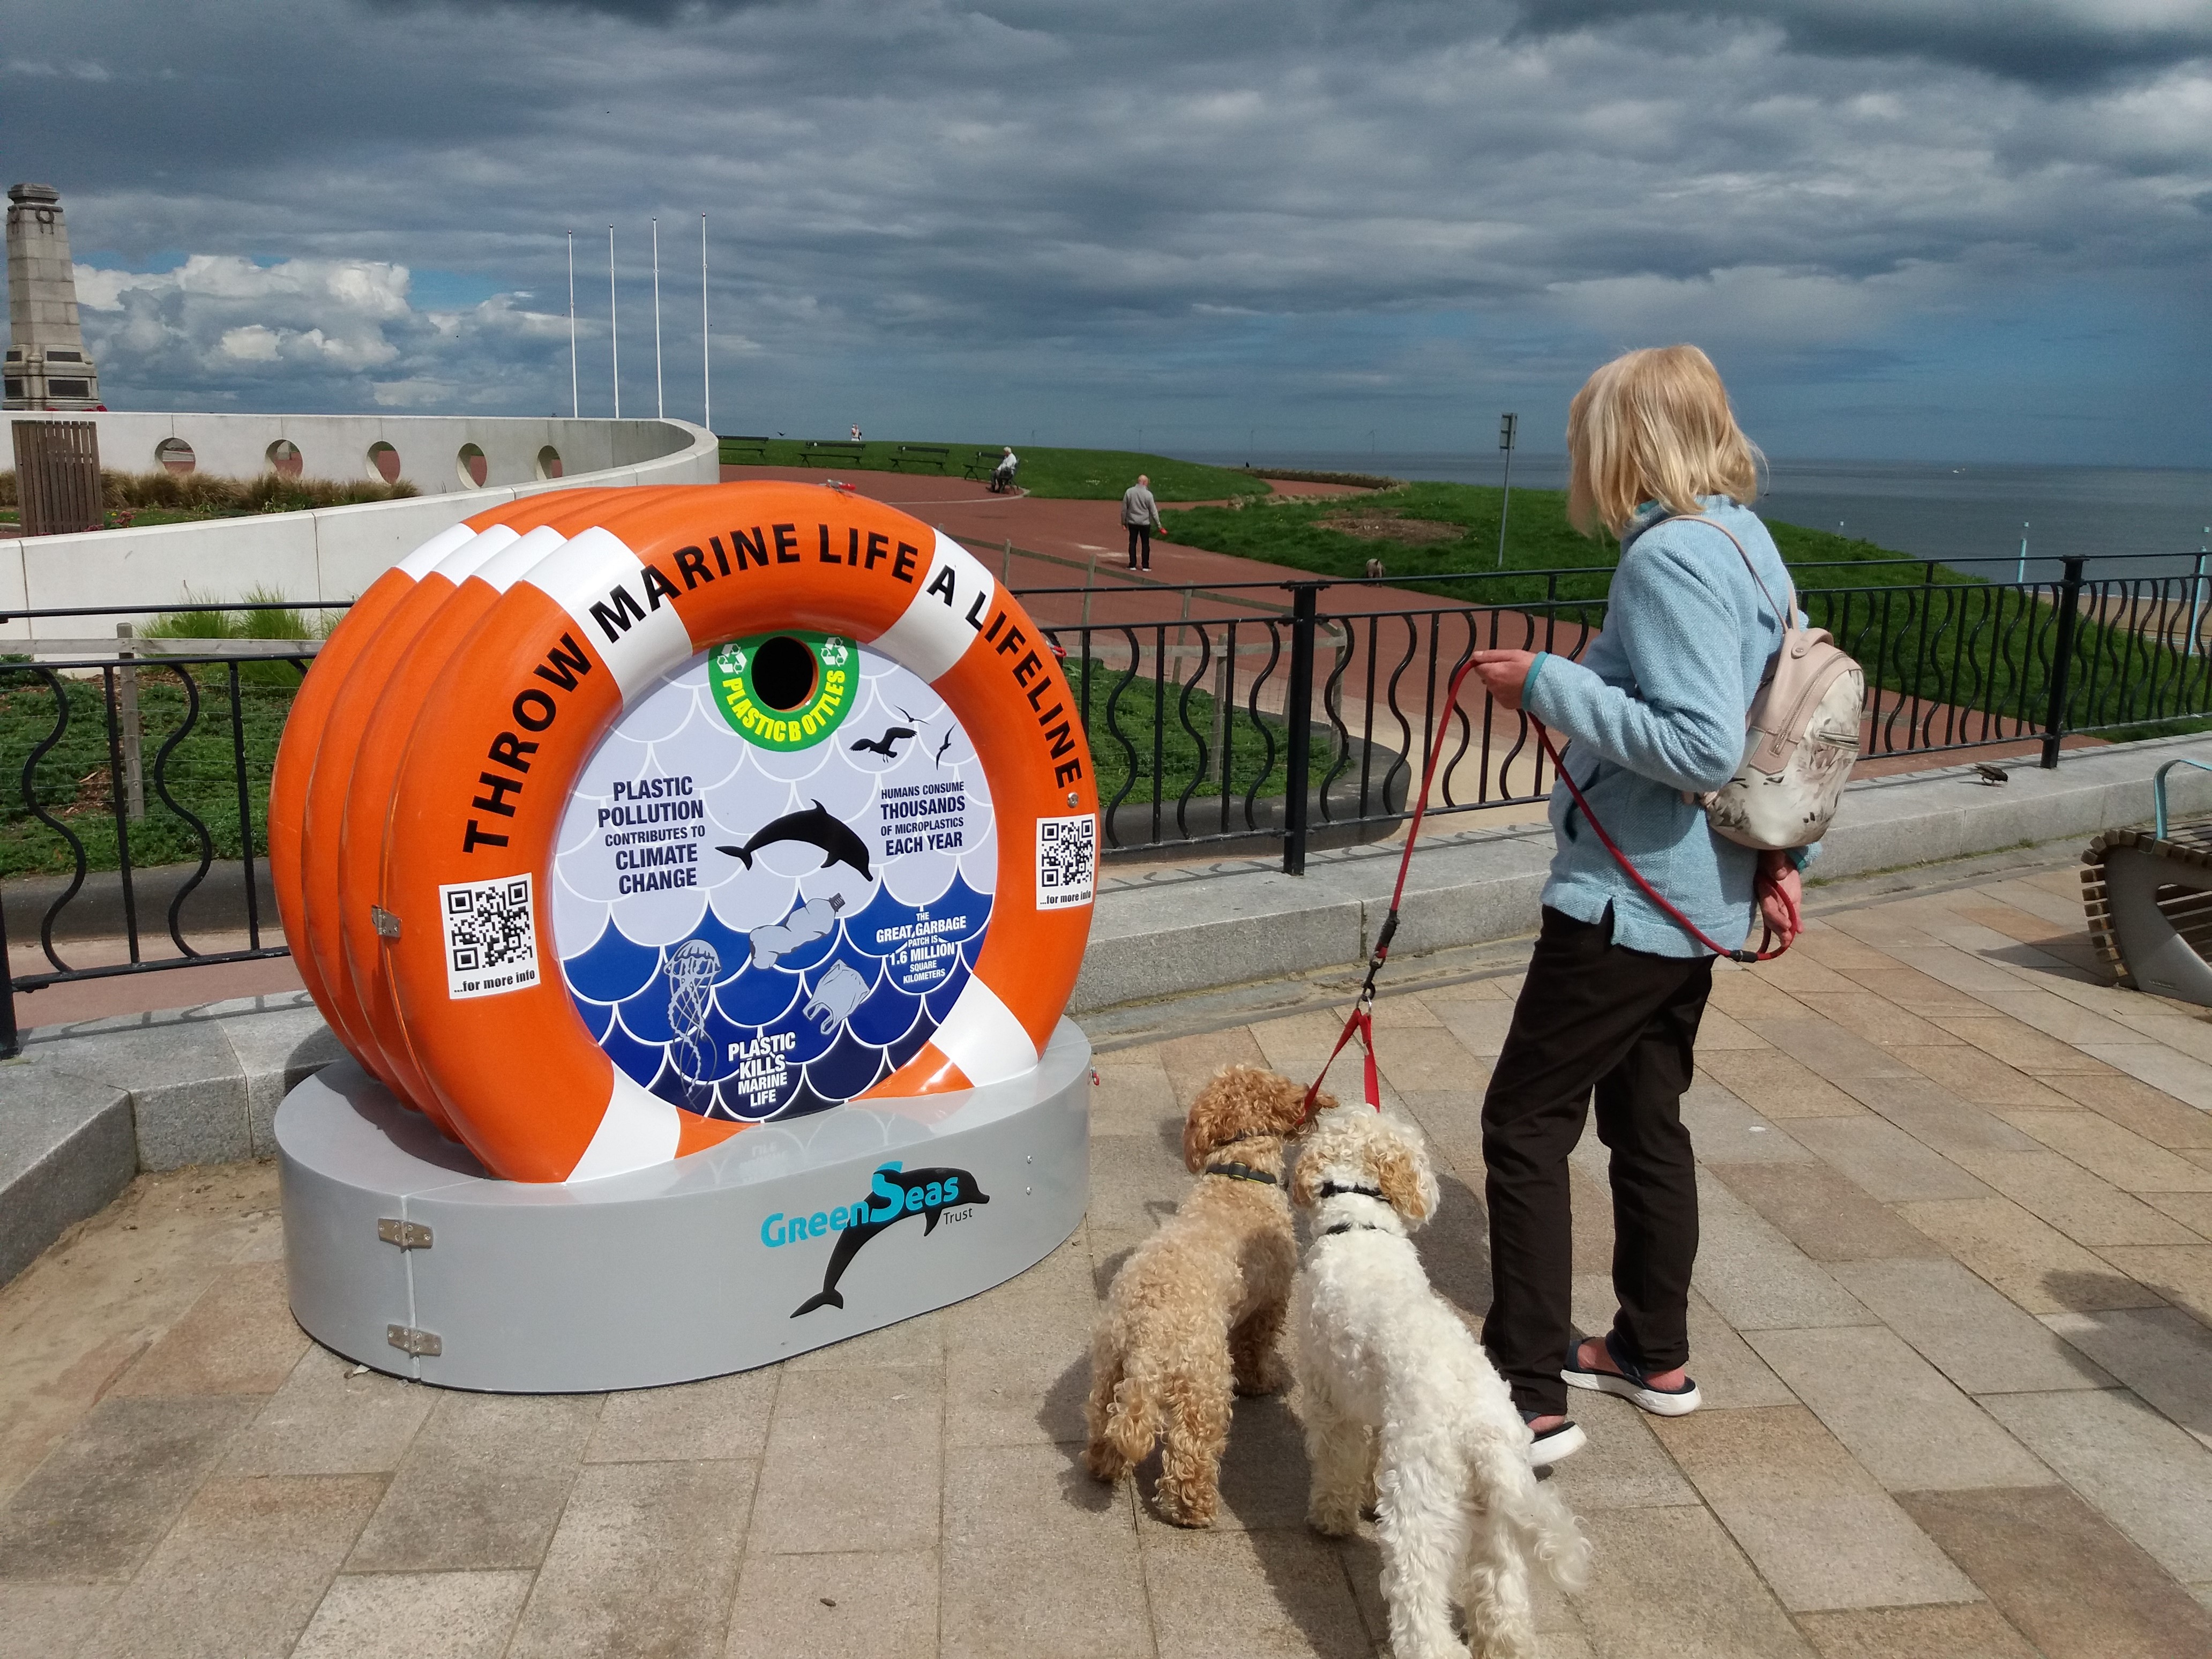 A woman and her two dogs stand facing a orange buoy-shaped bin on a seaside promenade.